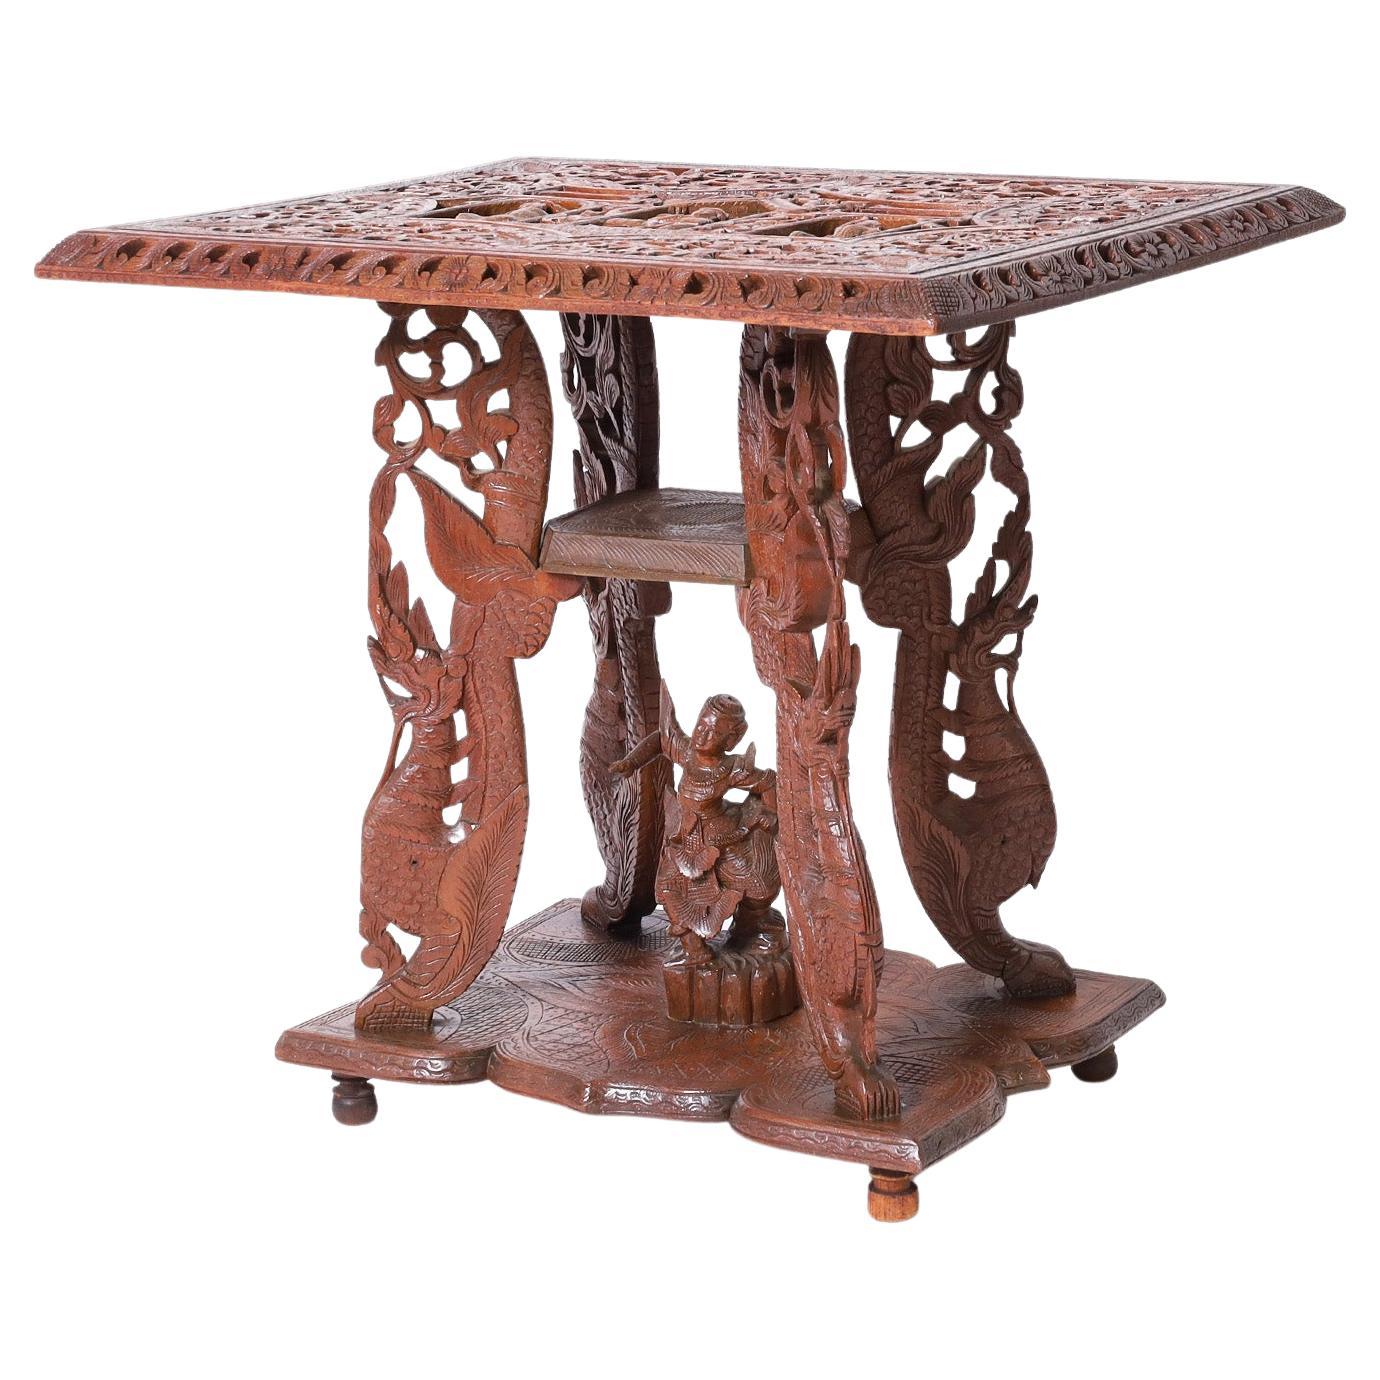 Anglo Indian Carved Wood Stand or Table